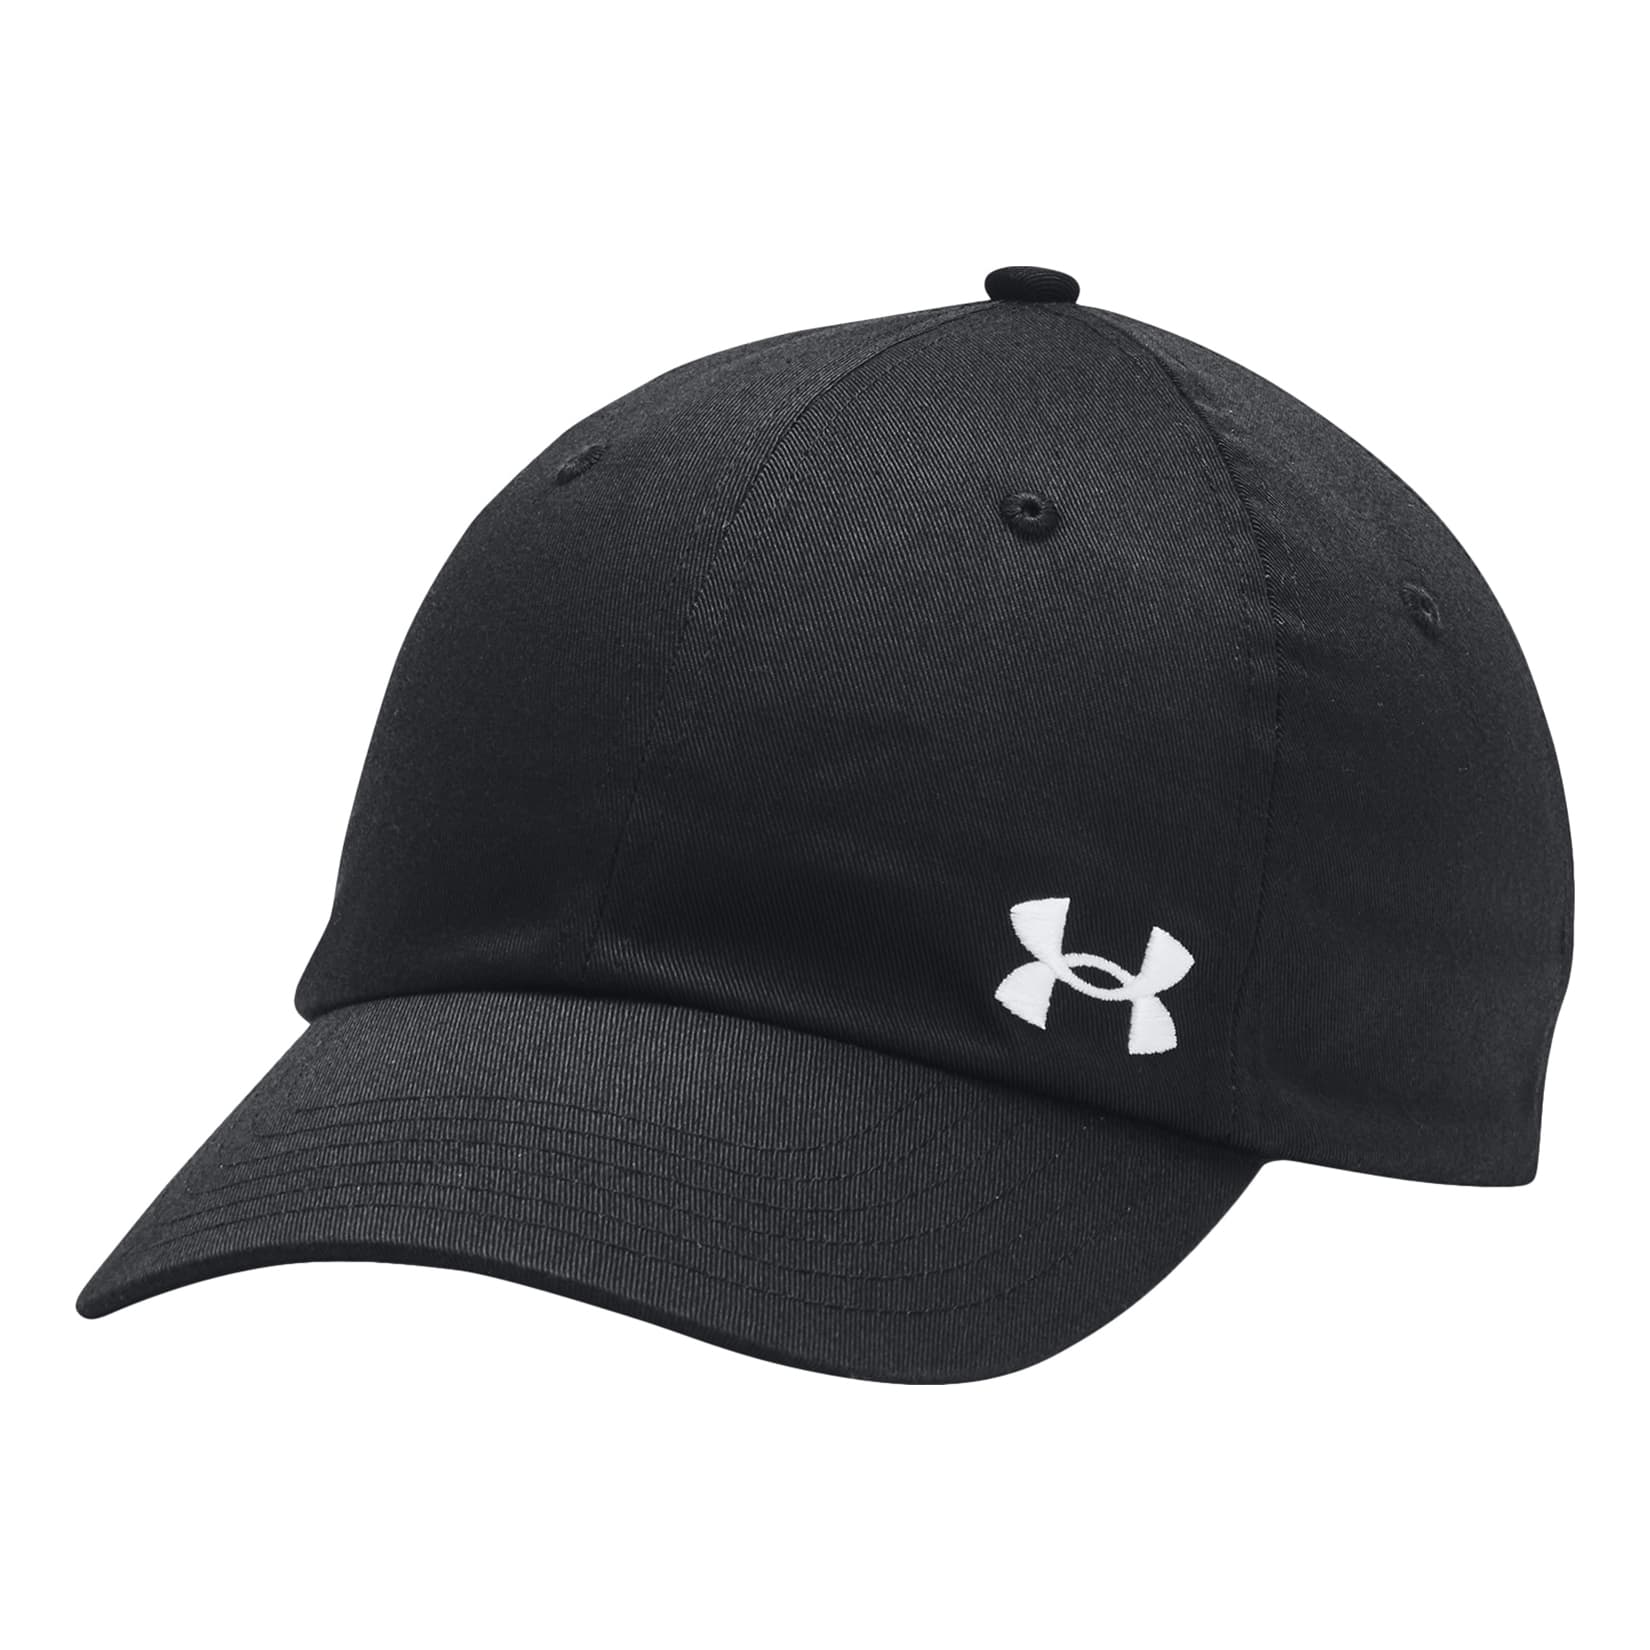 Under Armour Men's UA Blitzing Hat Stretch Fitted Cap 1376700 - New